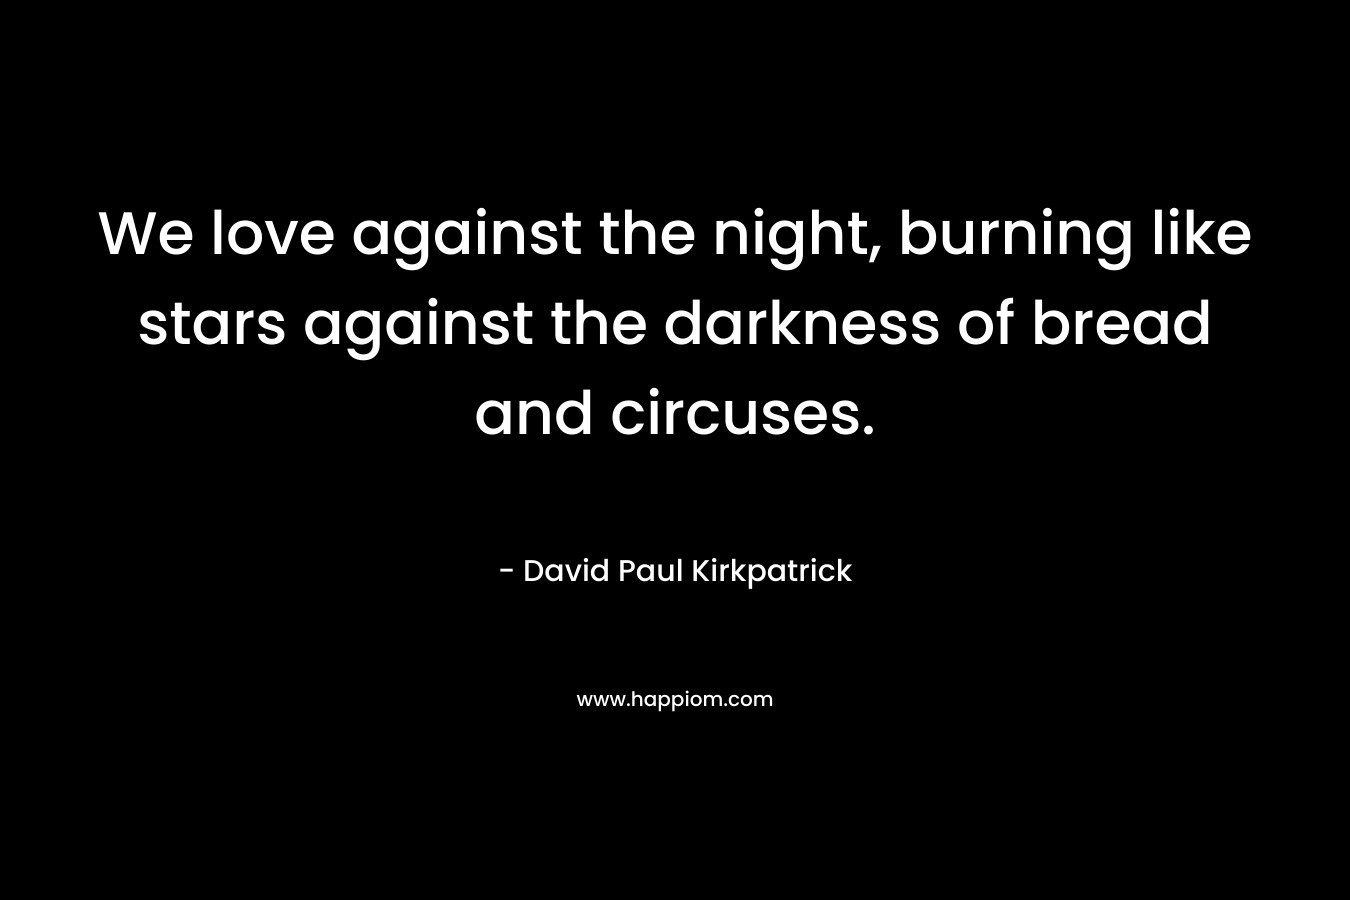 We love against the night, burning like stars against the darkness of bread and circuses.